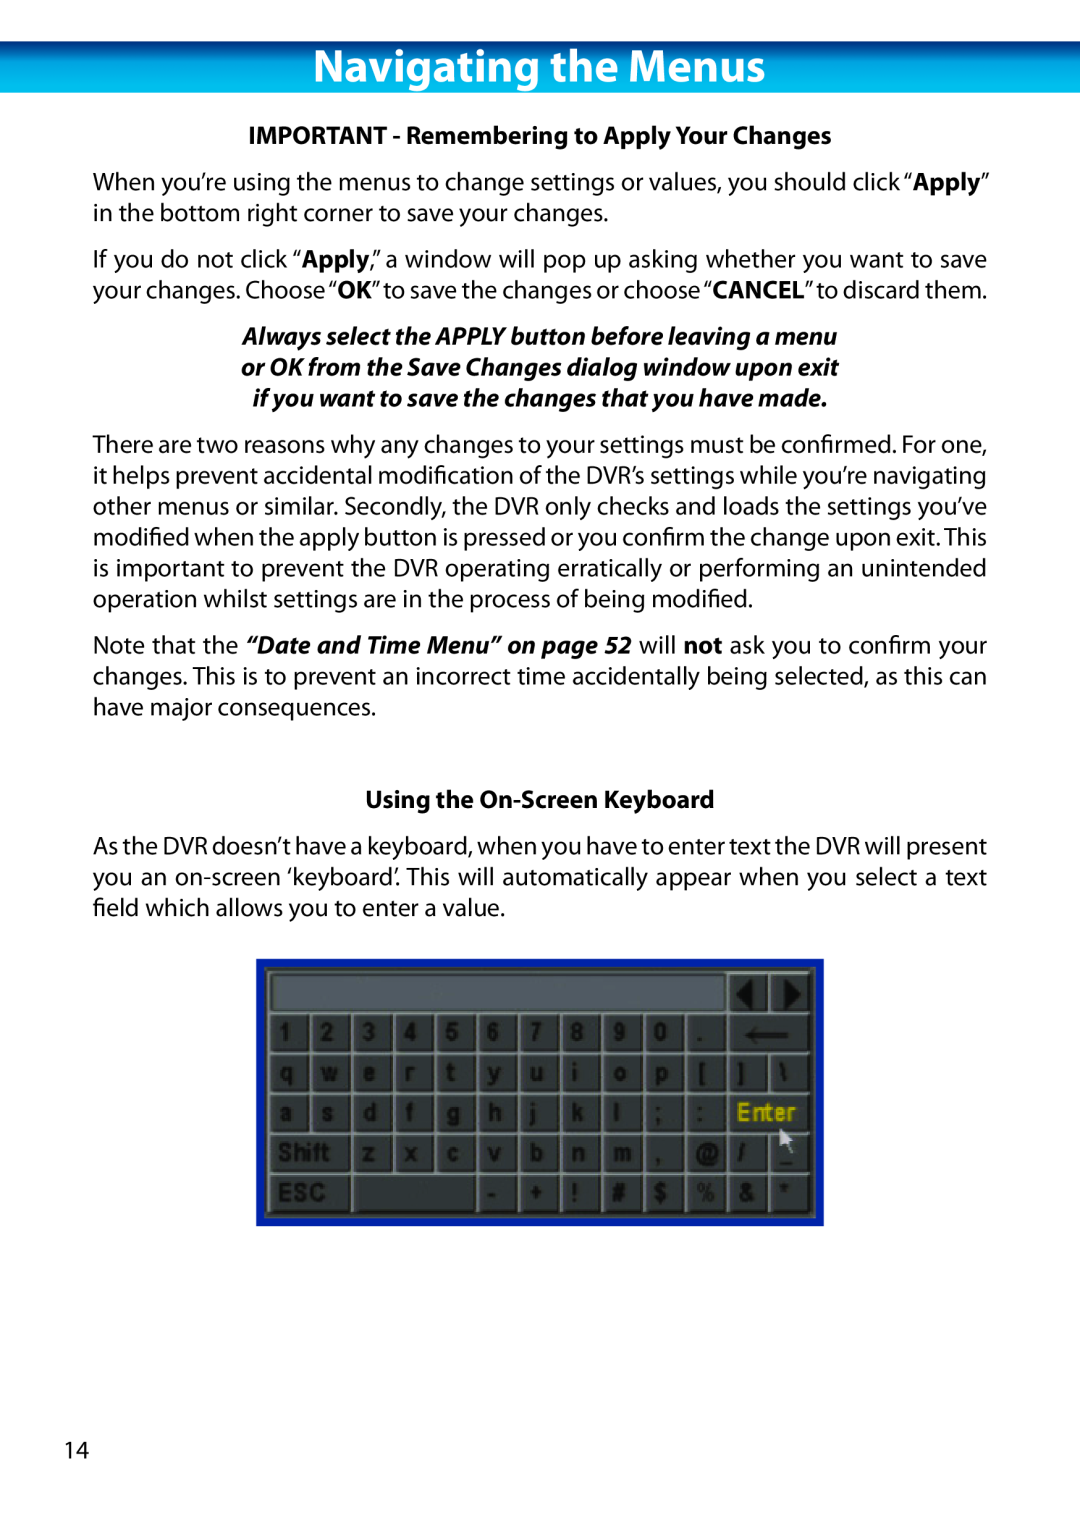 Swann H.264 manual IMPORTANT - Remembering to Apply Your Changes, Using the On-ScreenKeyboard, Navigating the Menus 